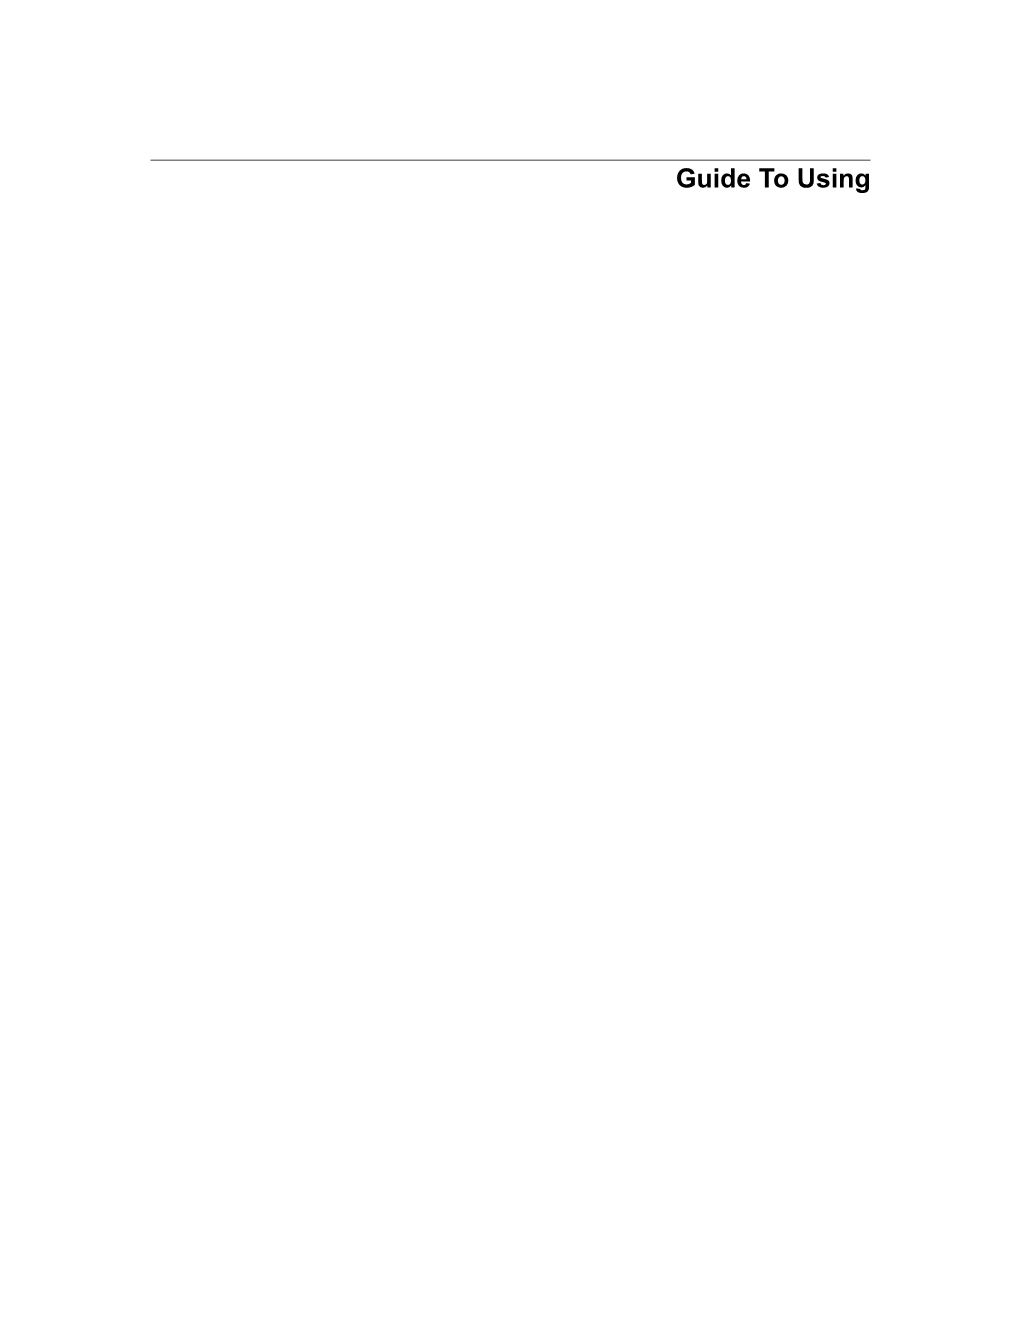 Guide to Using